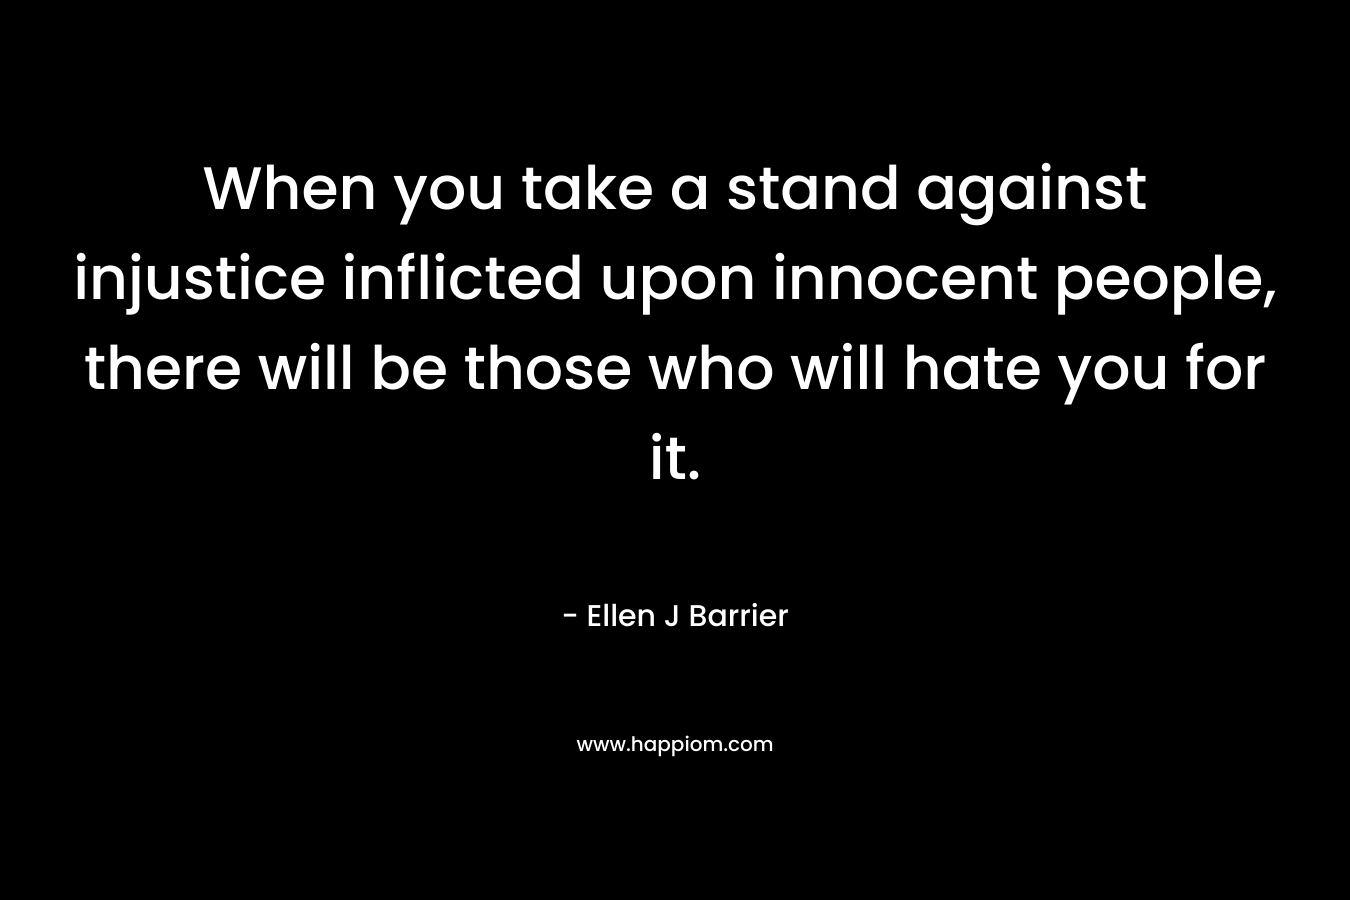 When you take a stand against injustice inflicted upon innocent people, there will be those who will hate you for it.